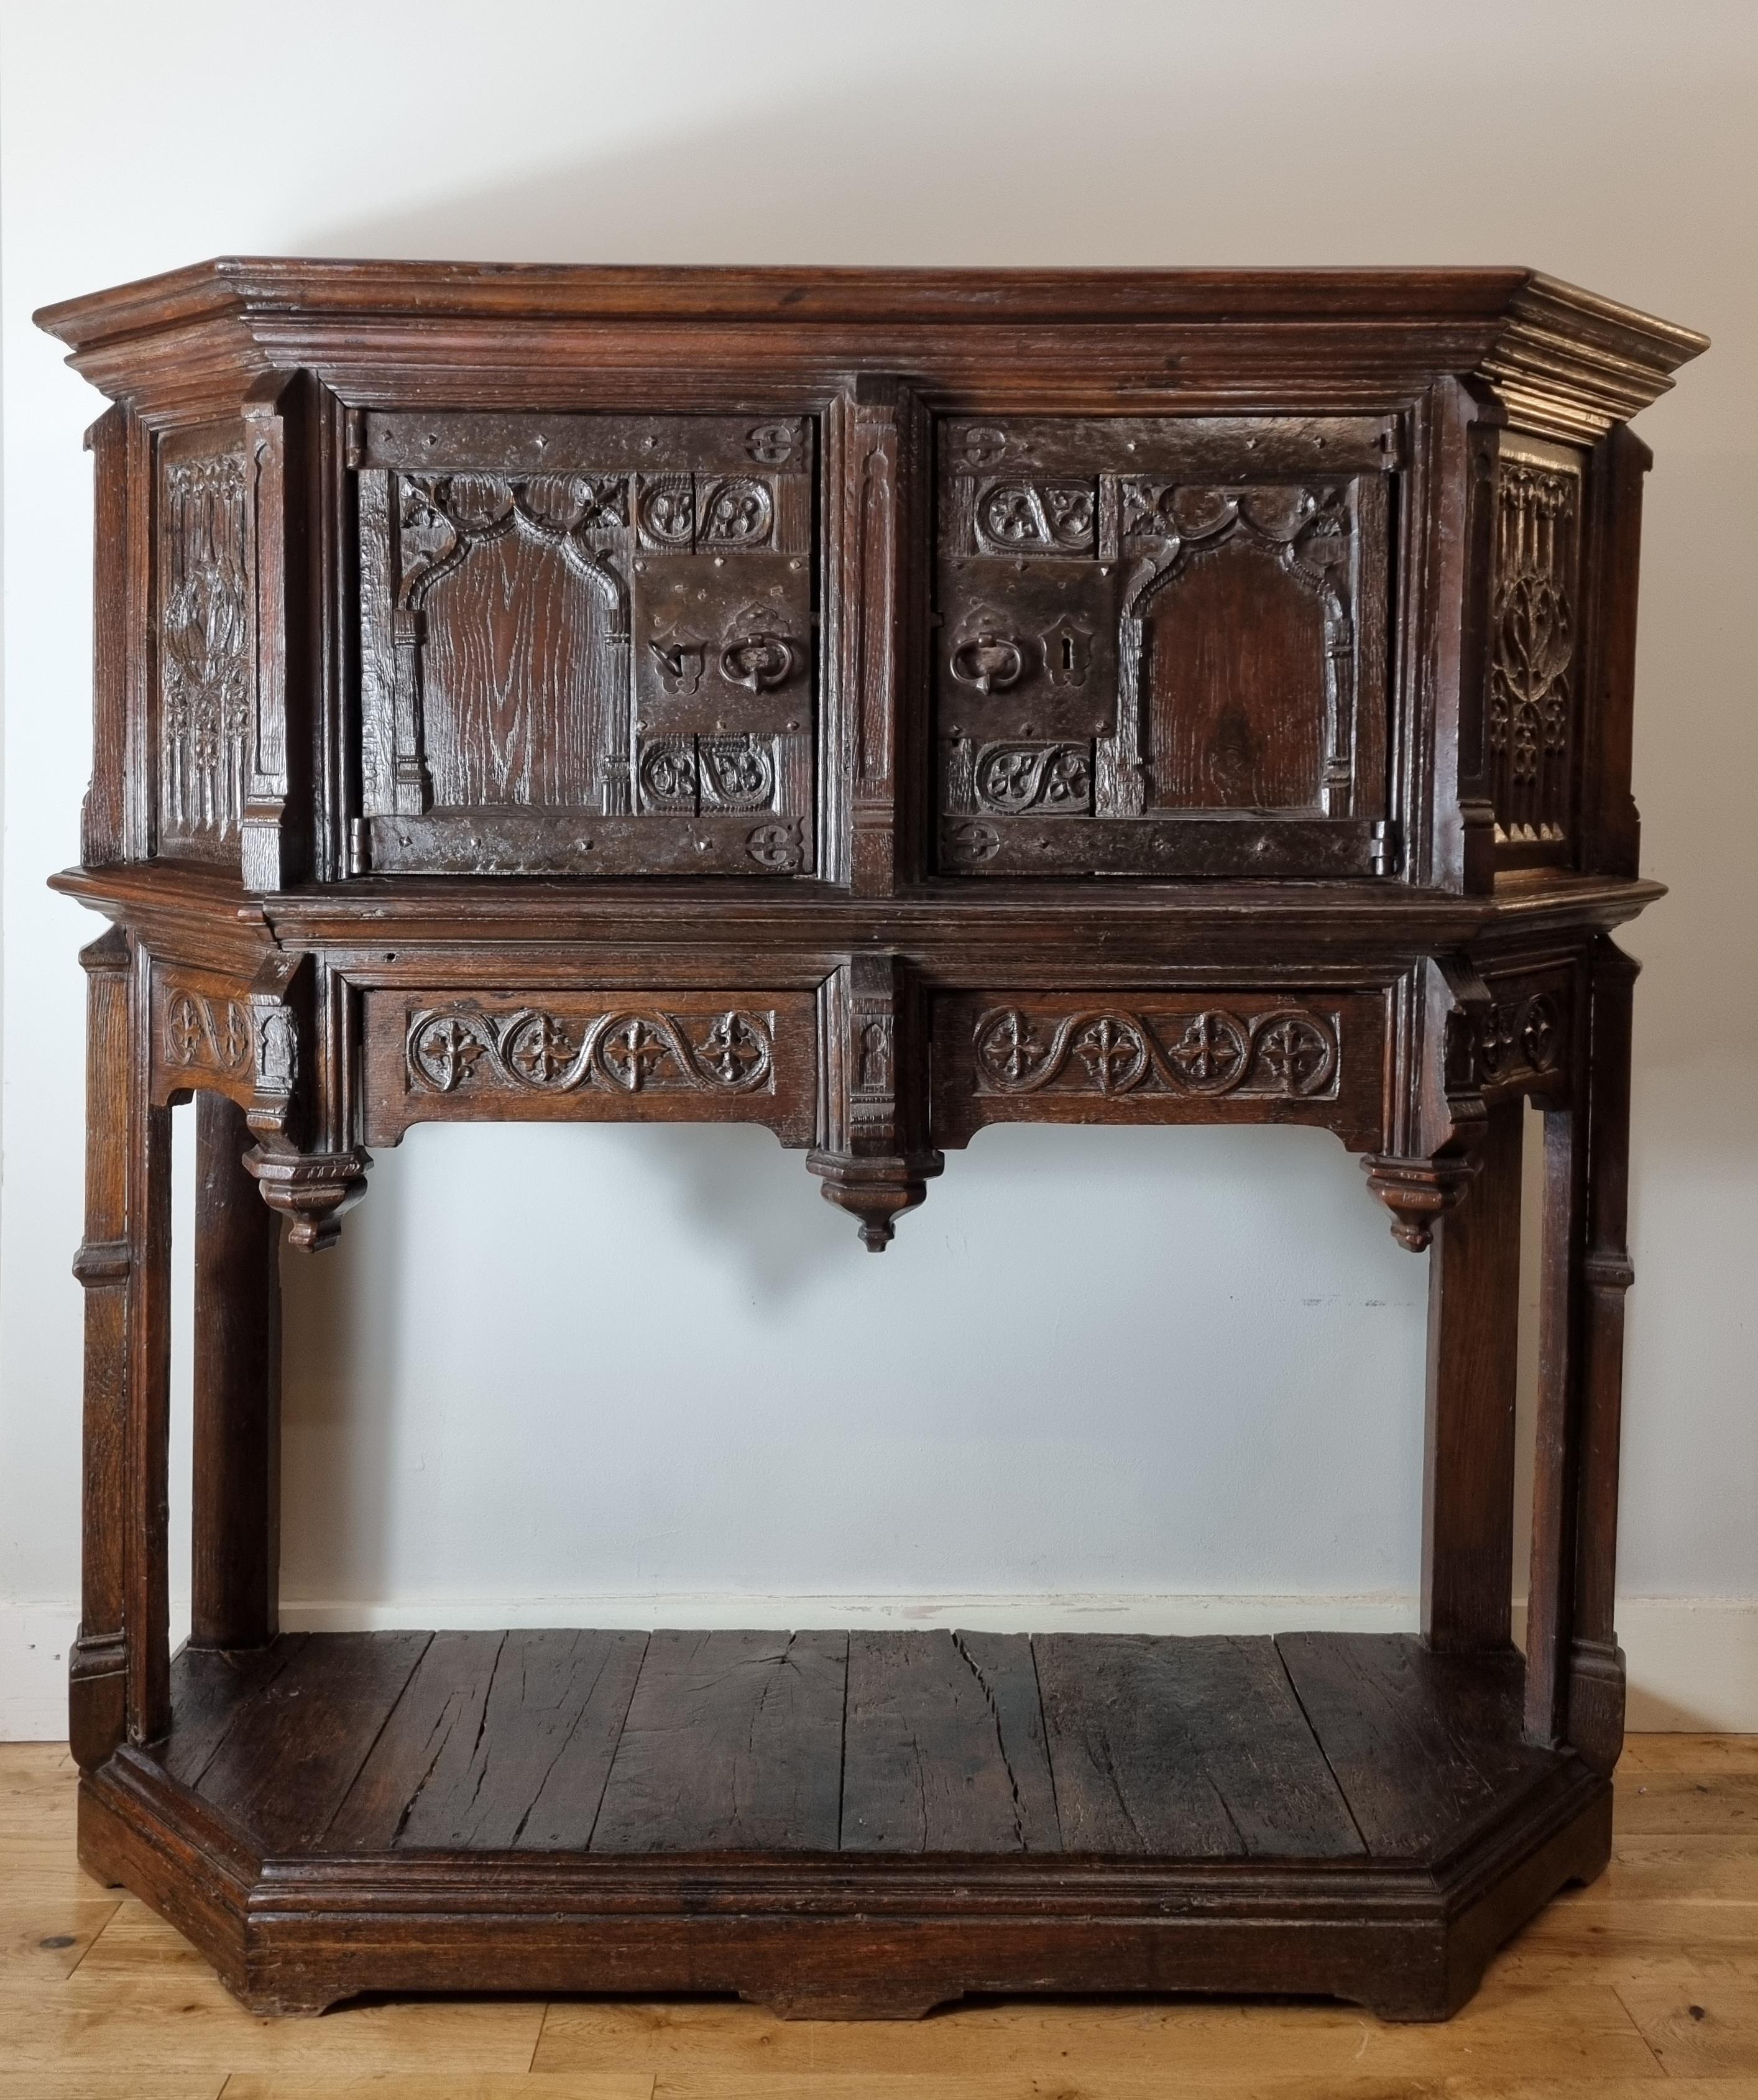 Gothic Oak Dressoir: 1460 - 1500 , 

France - Flandres

This exquisite Gothic oak dressoir dates back to the 15th century. This remarkable piece is a rare survivor from the Haute époque period and holds historical significance.

The dressoir